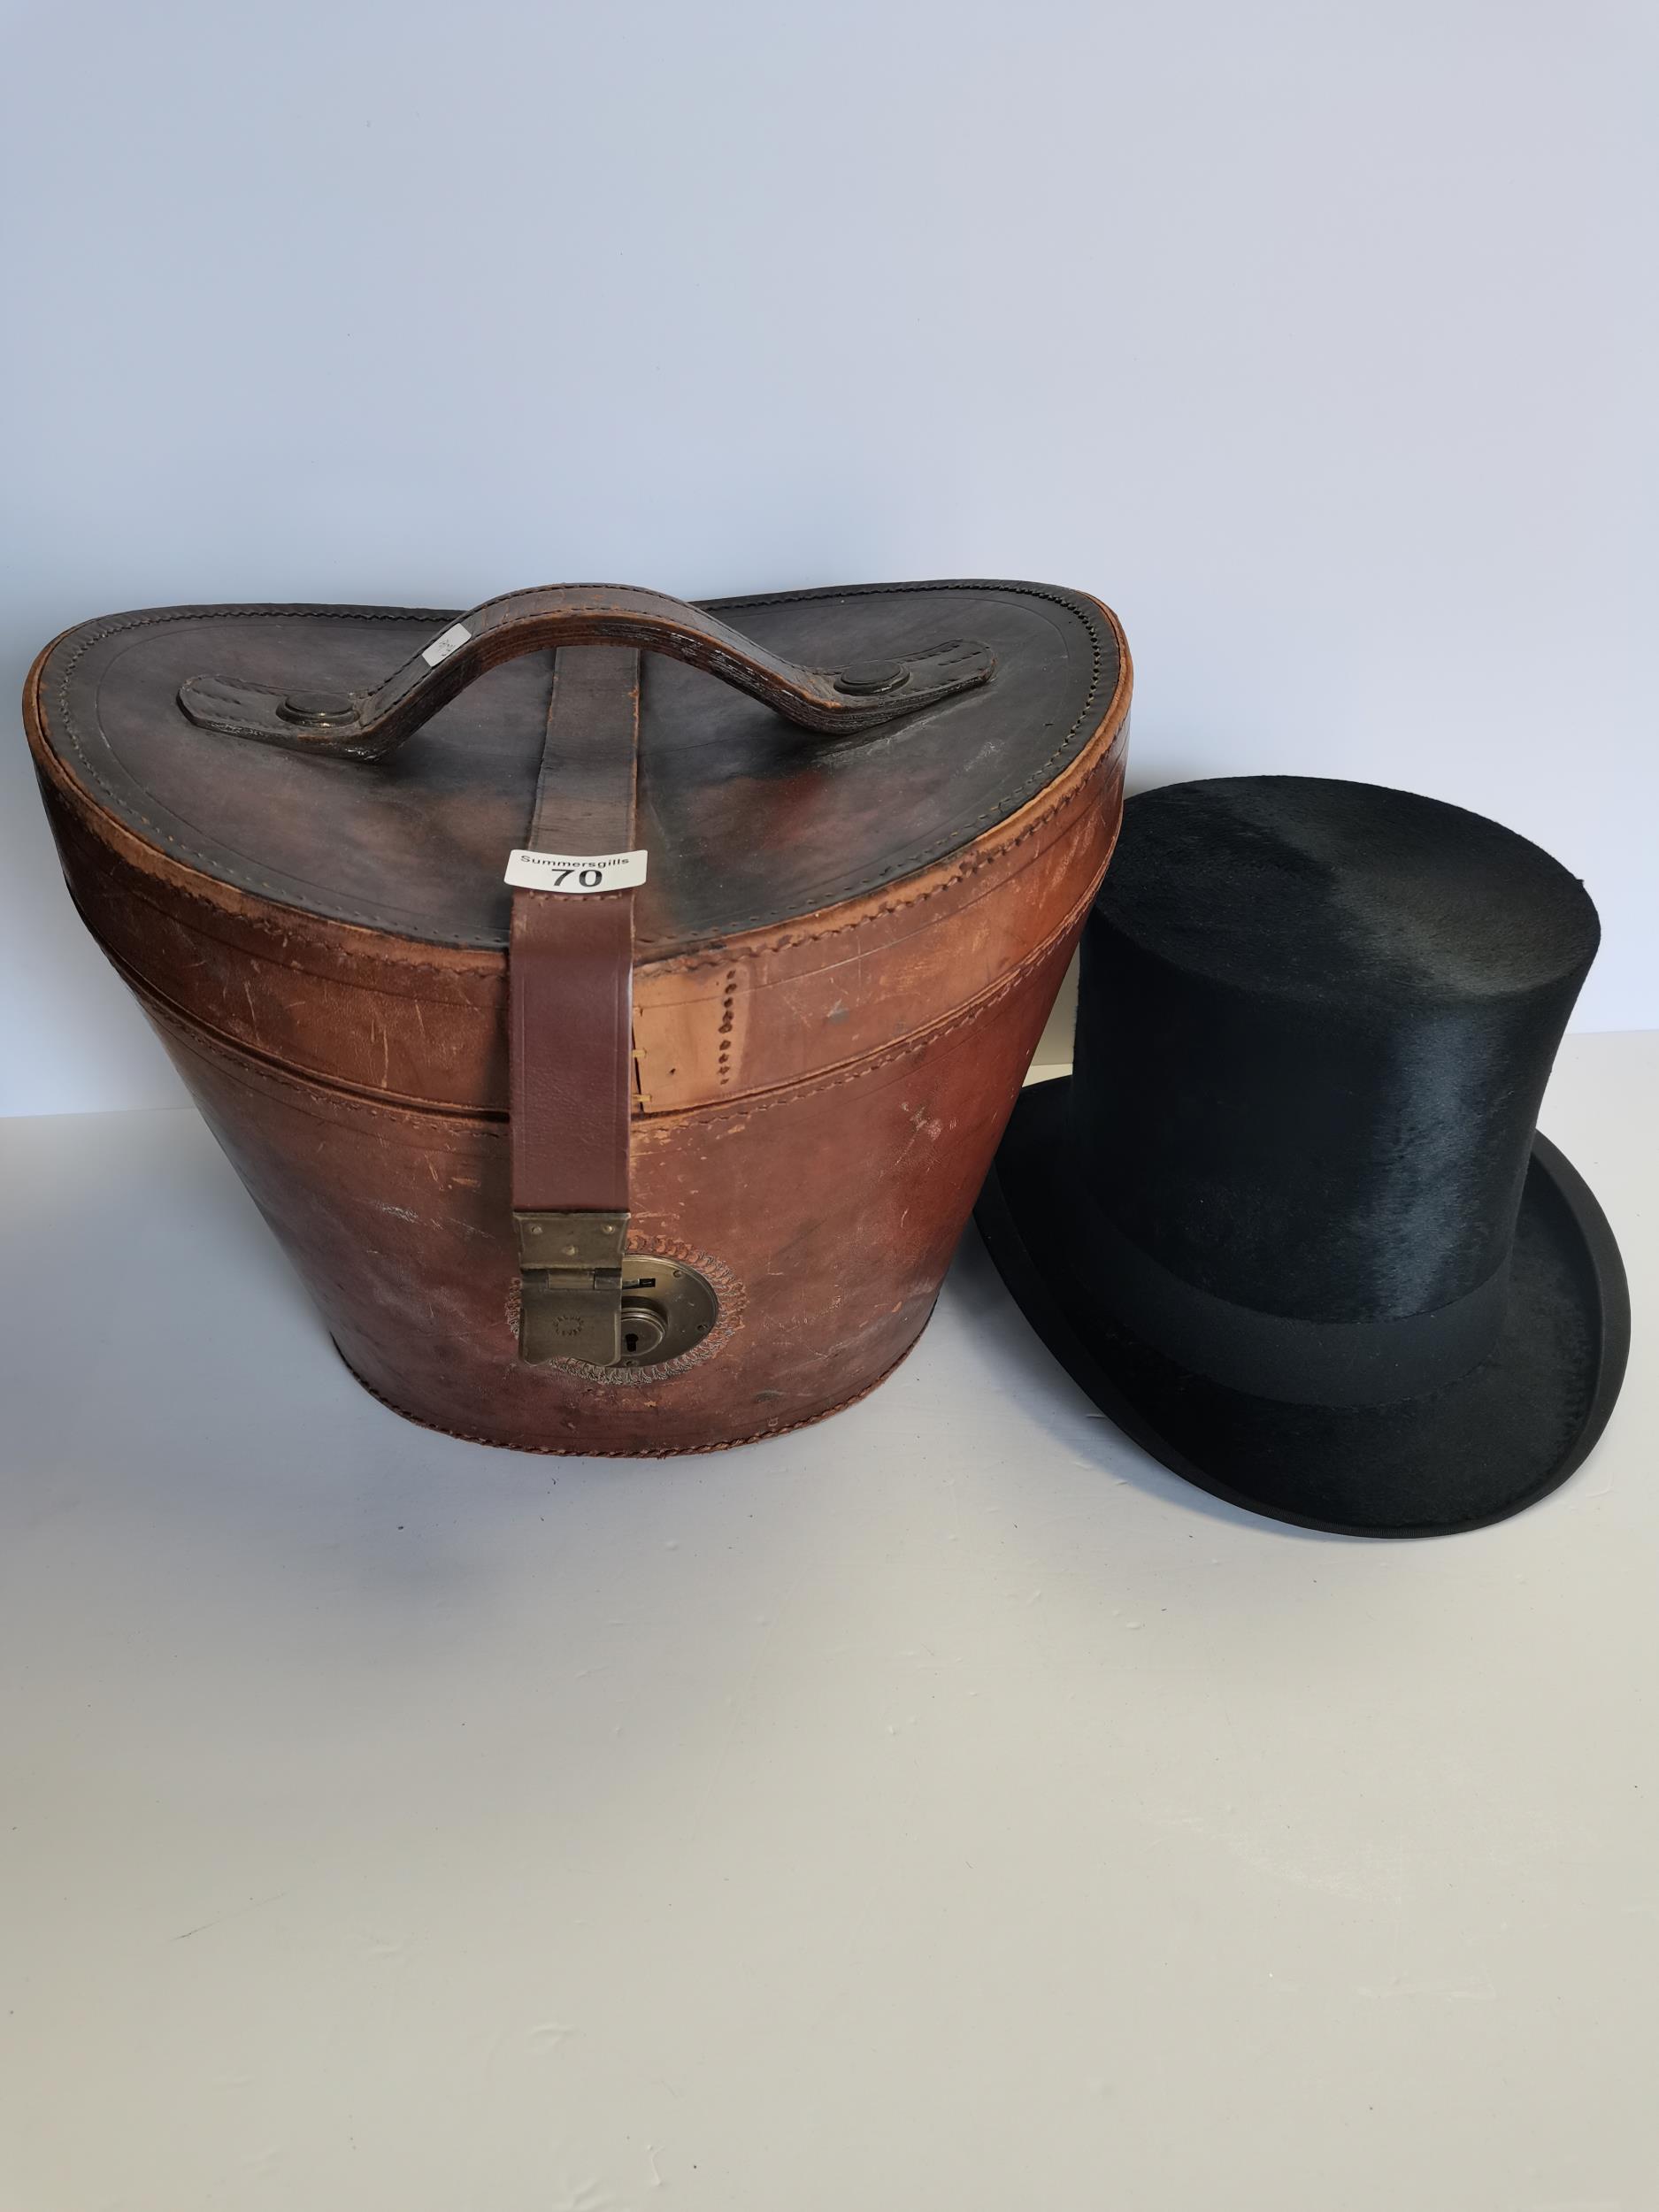 Top Hat by Lincoln Bennett & co in original leather box. Circumference of inside of headband 22.5